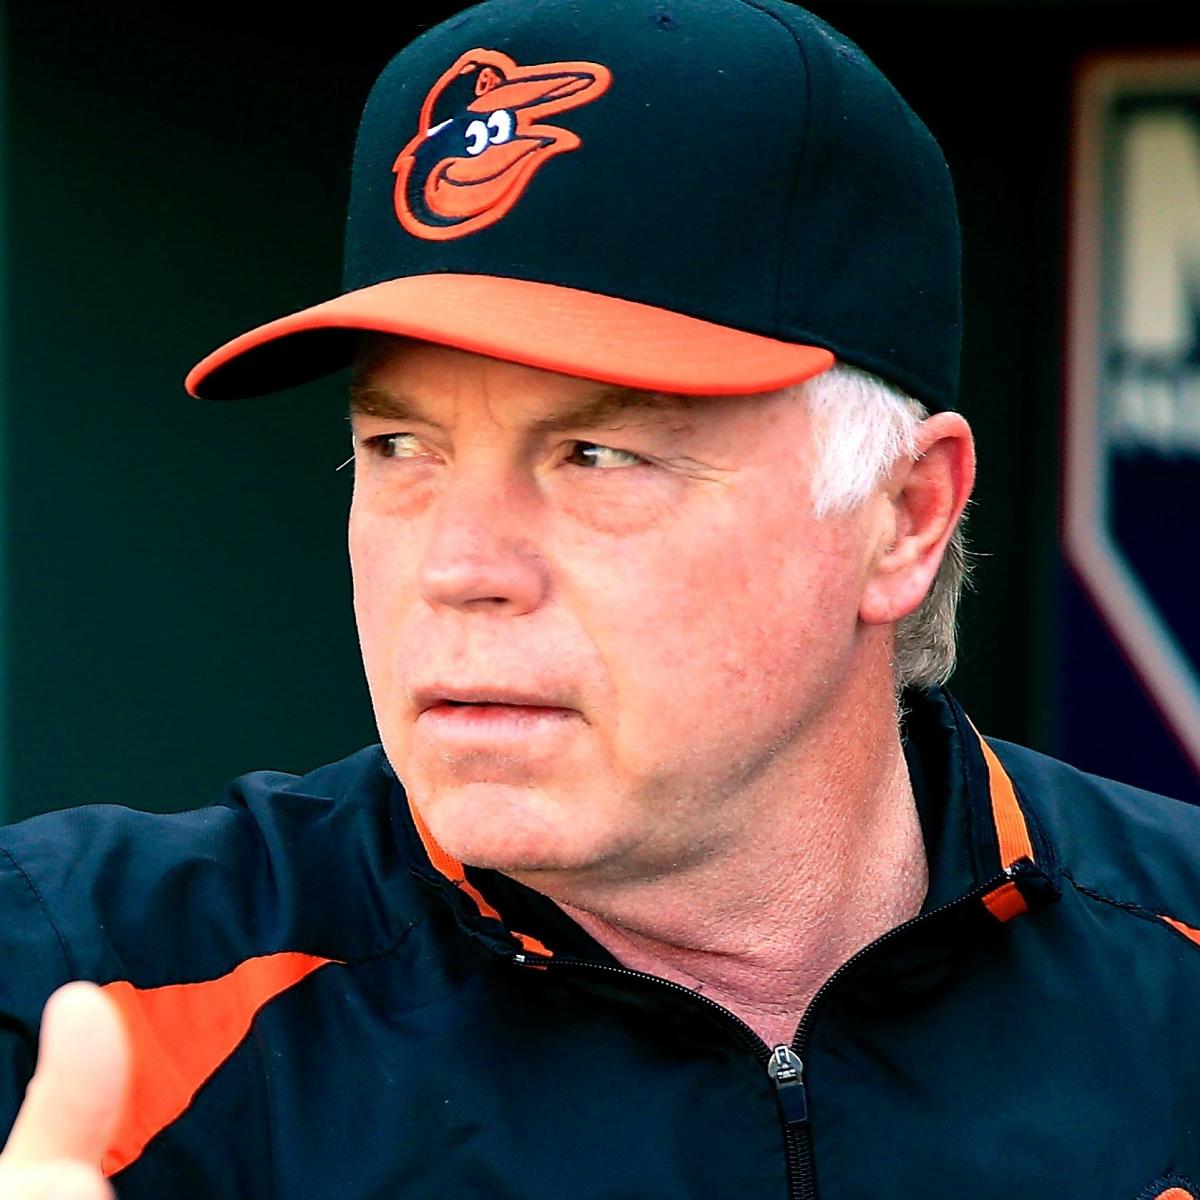 MLB Network - Bringing 20 years of Big League managerial wisdom to your 📺  Welcome to MLB Network, Buck Showalter!